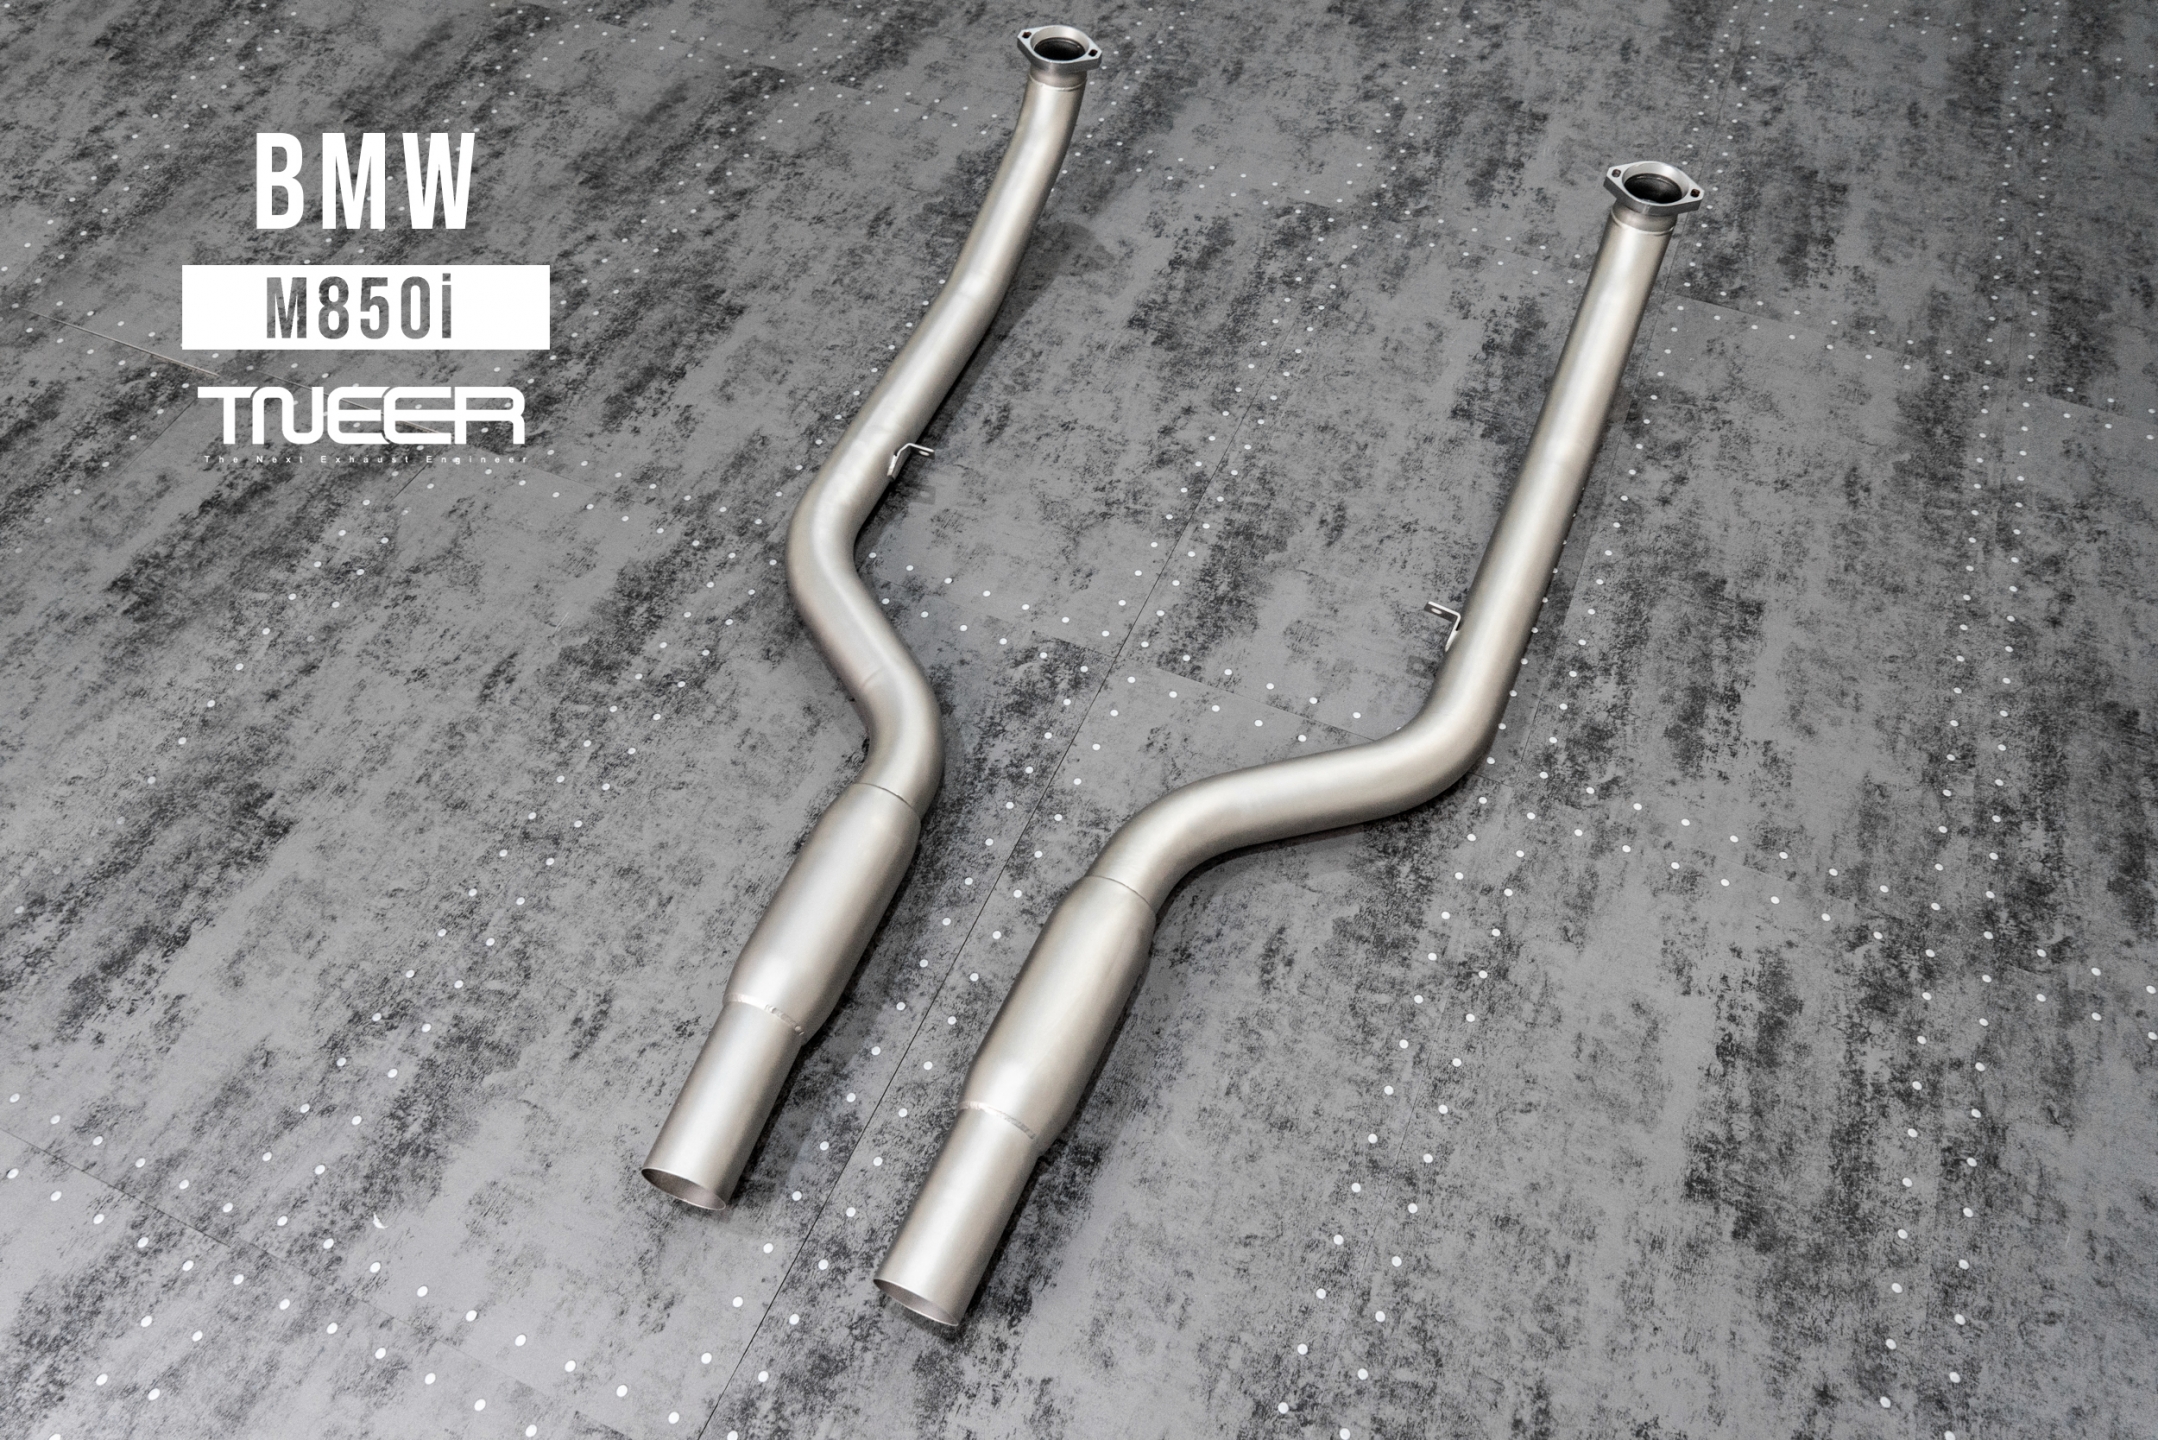 BMW G14/G15 M850i Coupe/Convertible TNEER Performance Exhaust System